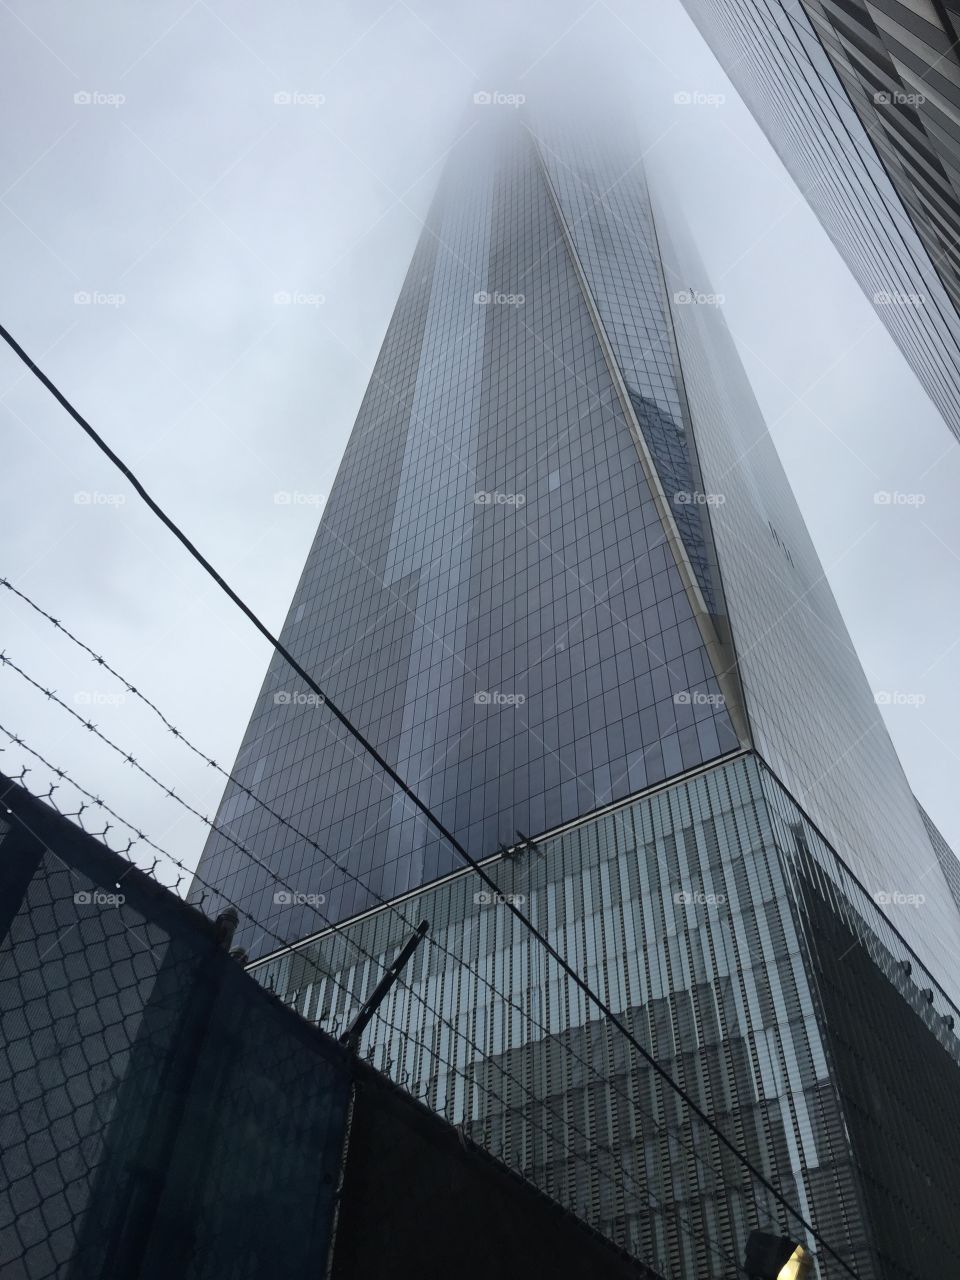 Freedom tower in barbed wires??